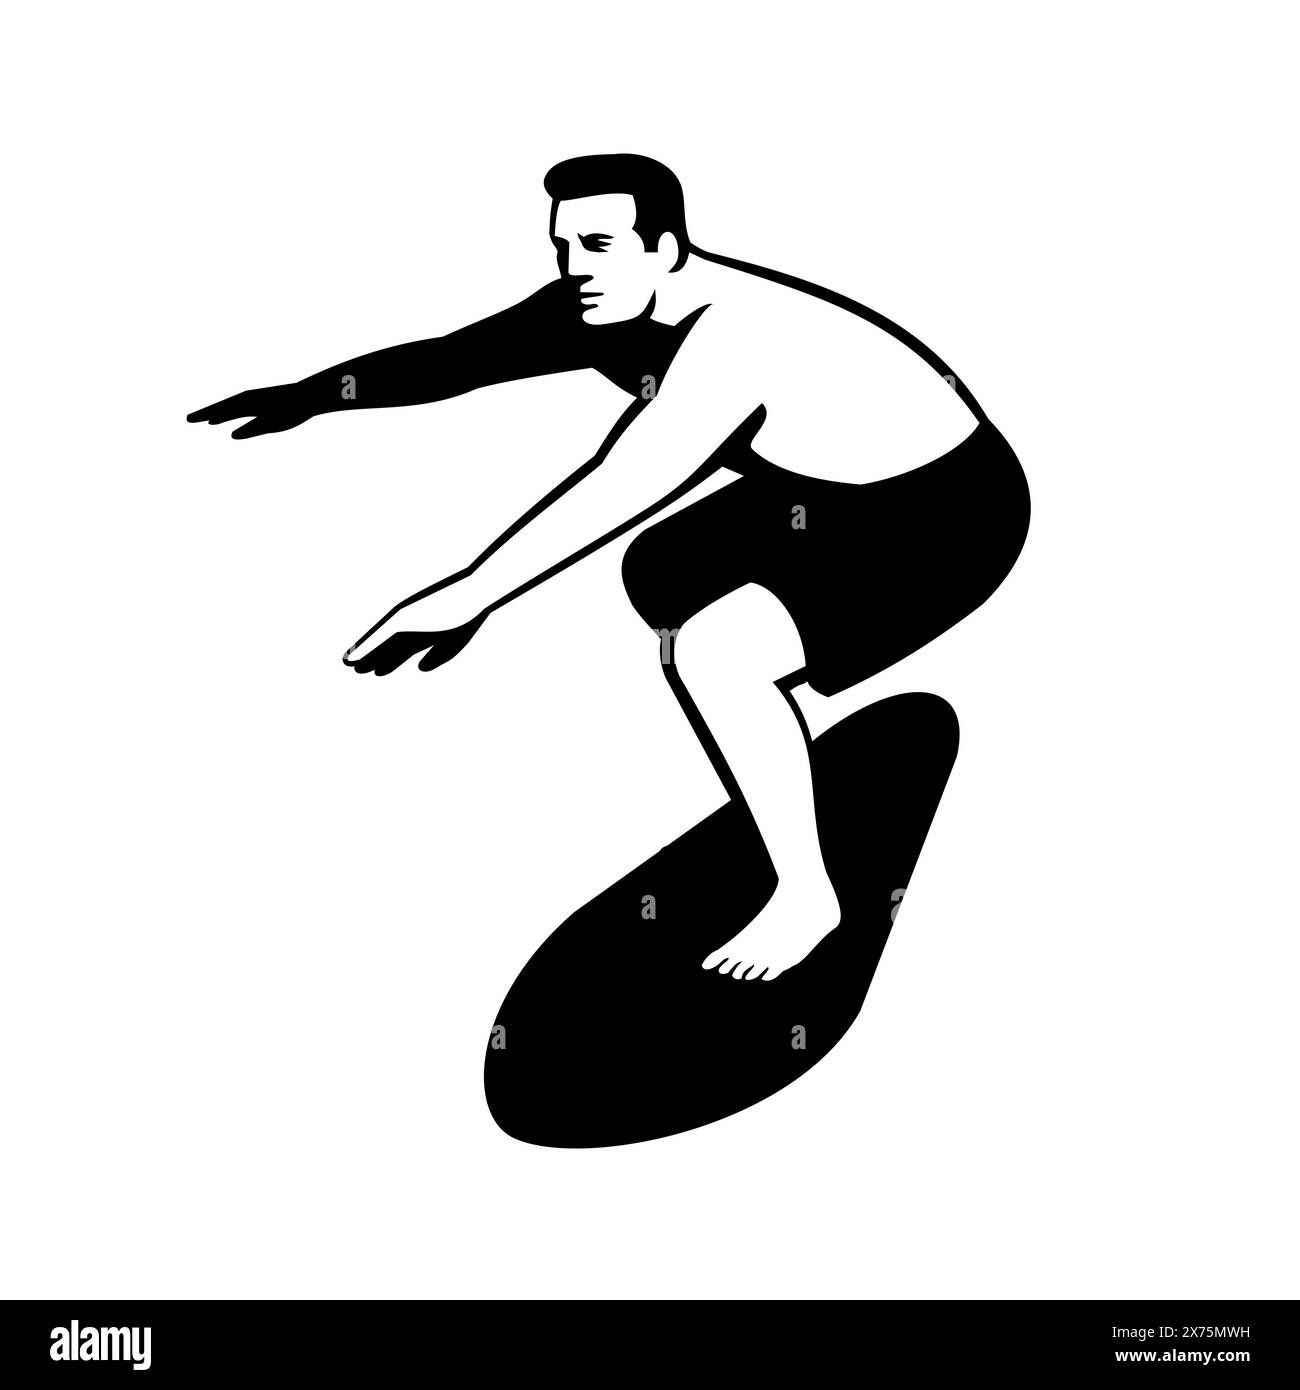 Retro style illustration of a male surfer on surf board surfing front view on isolated background done in black and white. Stock Vector